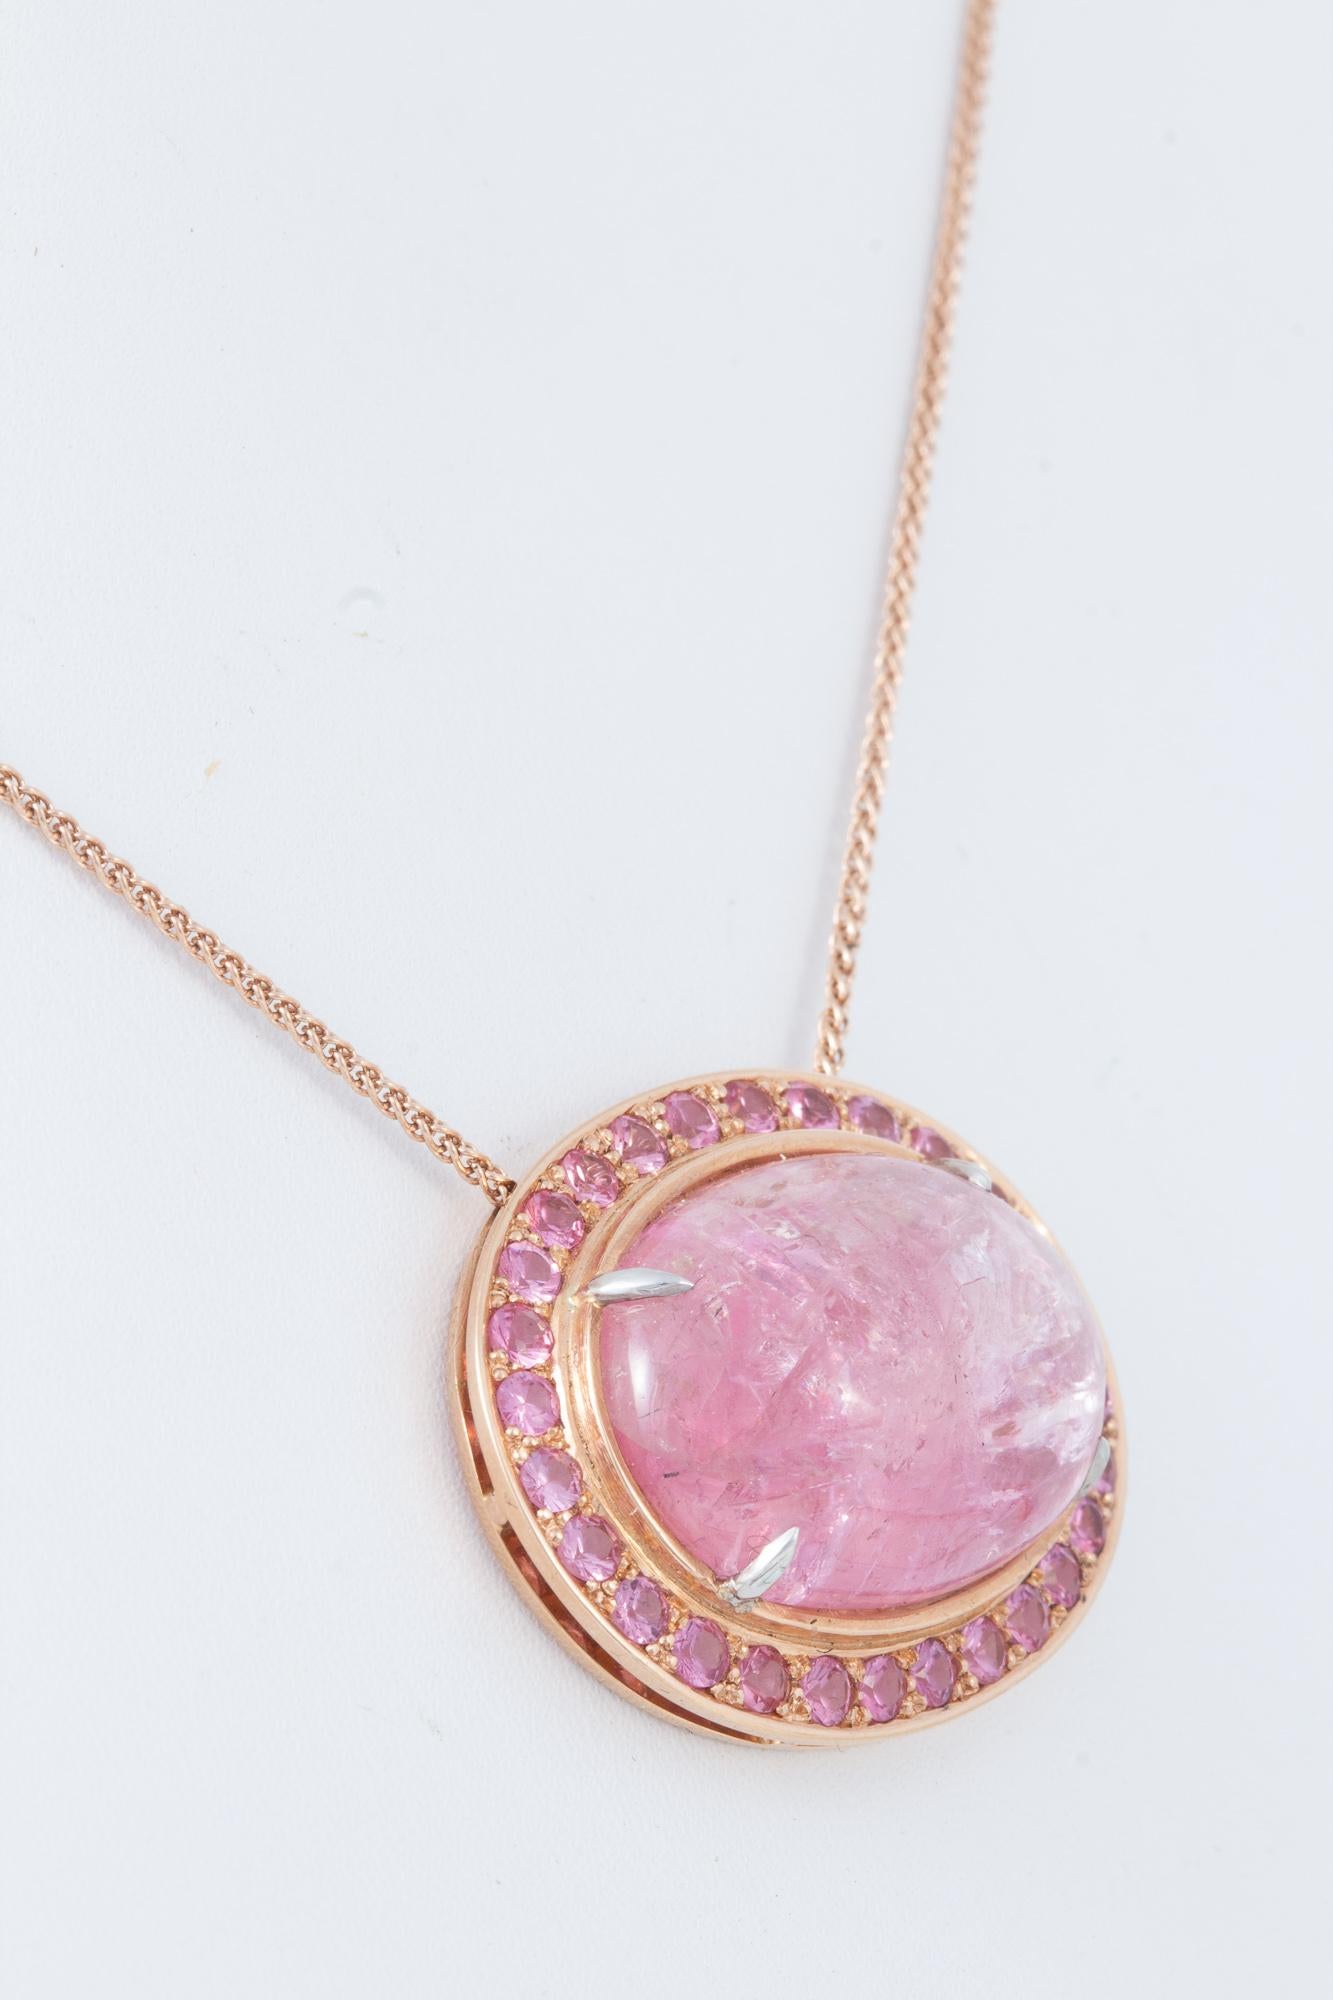 Oval Cut Rare Pink Fancy Tanzanite Cabochon Necklace in 18 kt Rose Gold